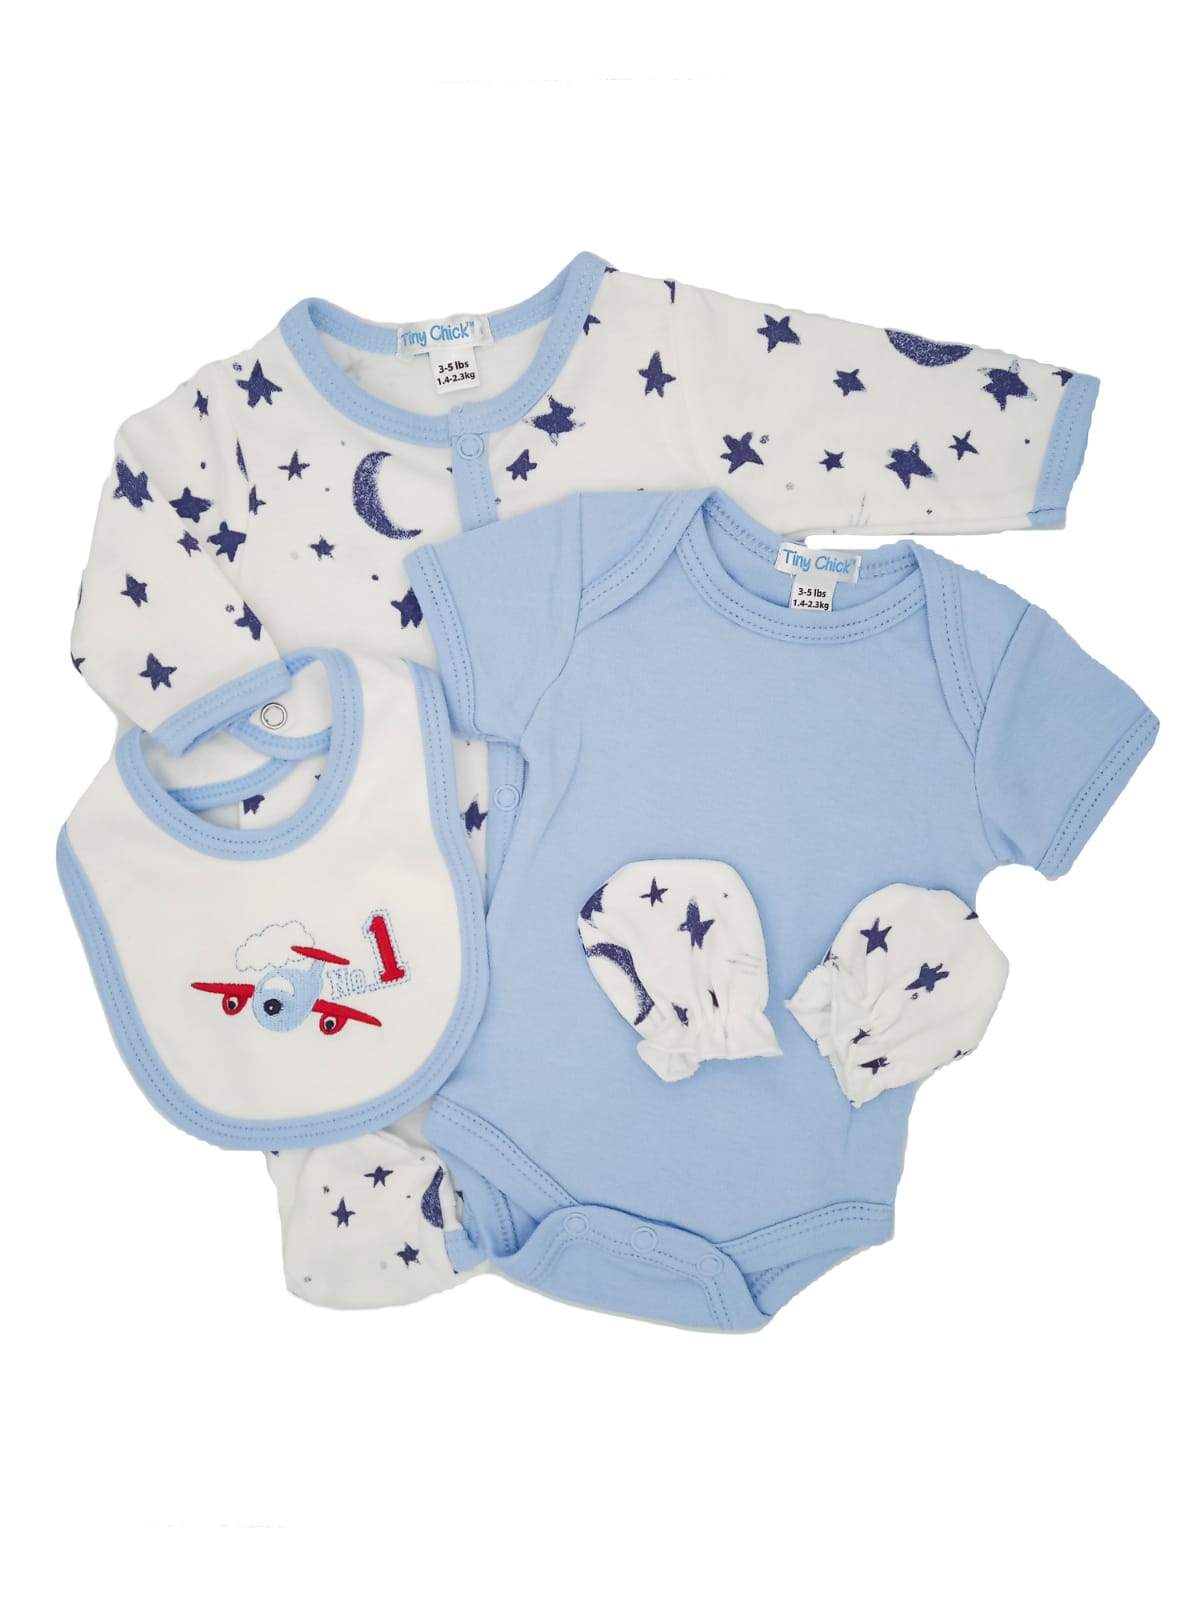 “Reach For The Stars” 4 Piece Set Outift Tiny Chick 